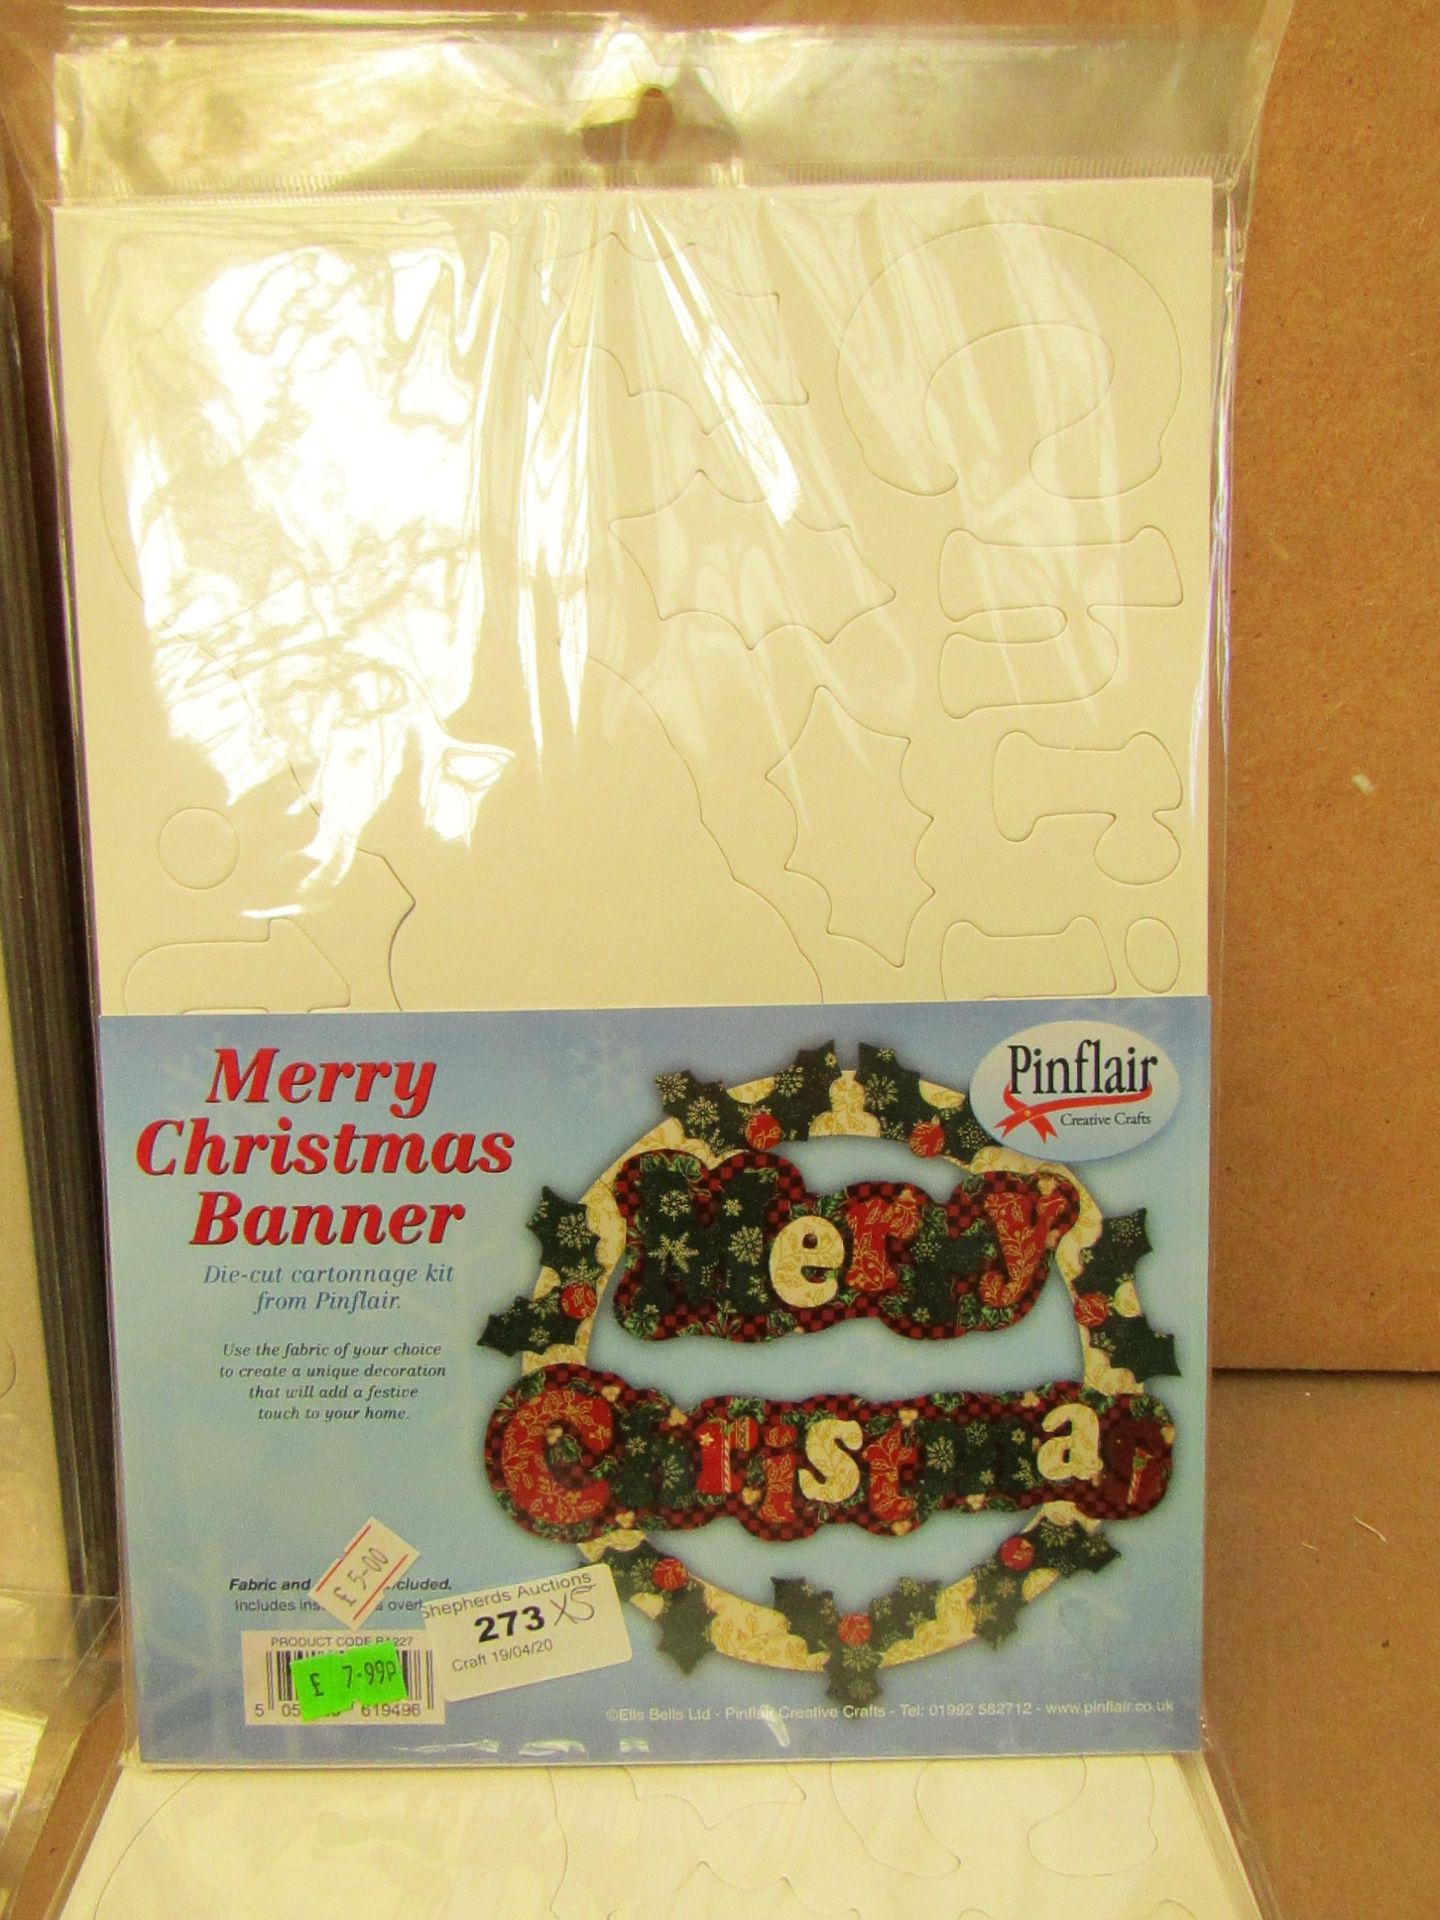 5x Christmas banners, new and packaged.